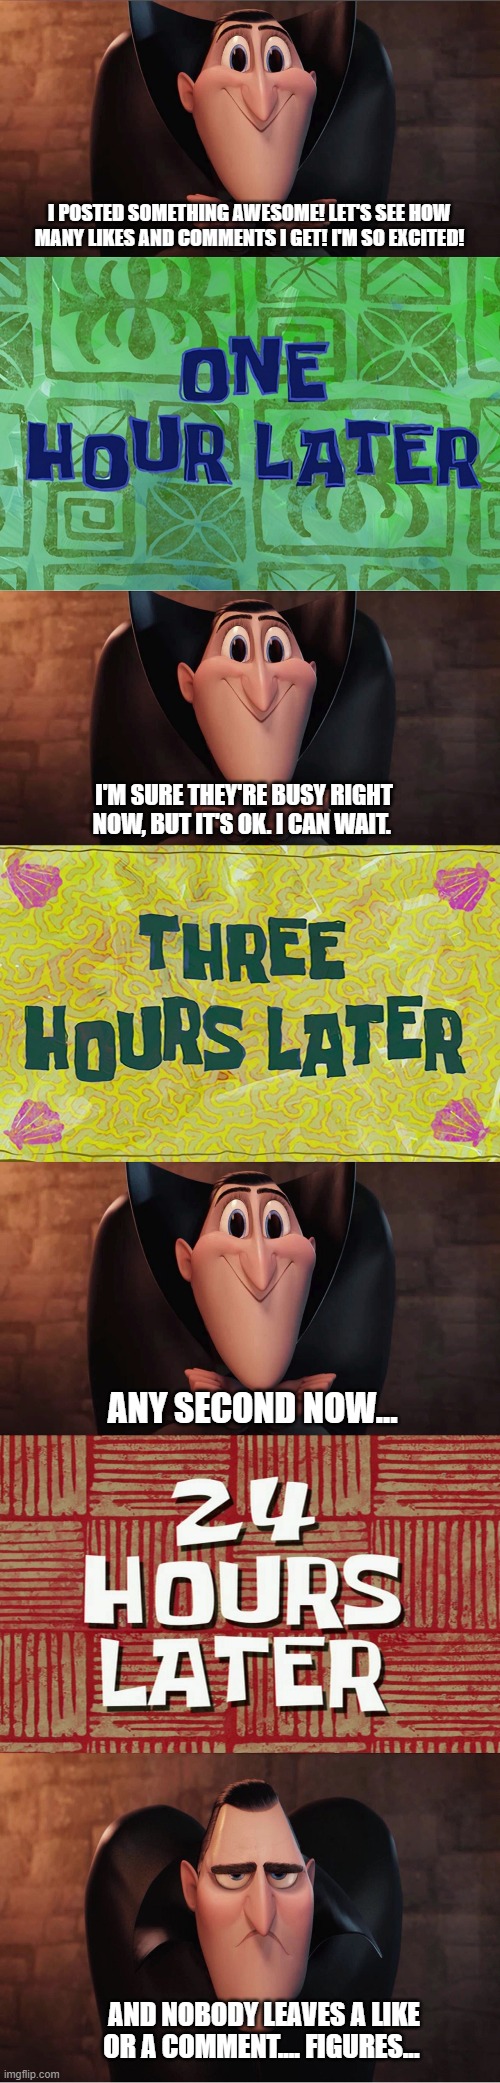 Dracula posting | I POSTED SOMETHING AWESOME! LET'S SEE HOW MANY LIKES AND COMMENTS I GET! I'M SO EXCITED! I'M SURE THEY'RE BUSY RIGHT NOW, BUT IT'S OK. I CAN WAIT. ANY SECOND NOW... AND NOBODY LEAVES A LIKE OR A COMMENT.... FIGURES... | image tagged in dracula,spongebob time card | made w/ Imgflip meme maker